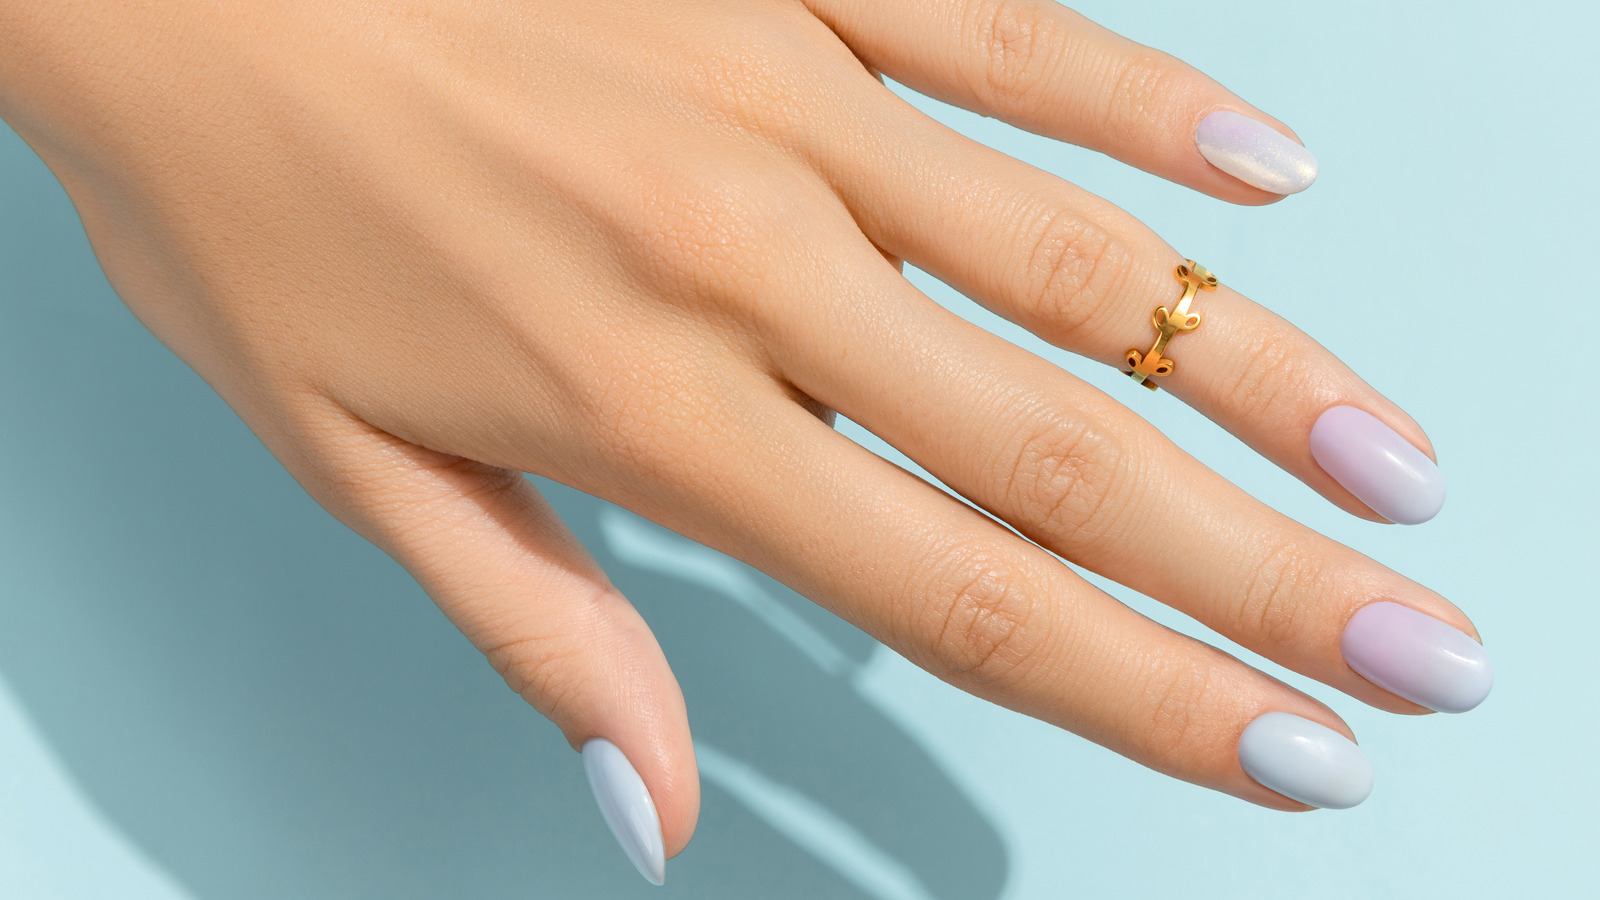 Most Beautiful Nail Designs You Will Love To wear In 2021 : Blue and gold  nails